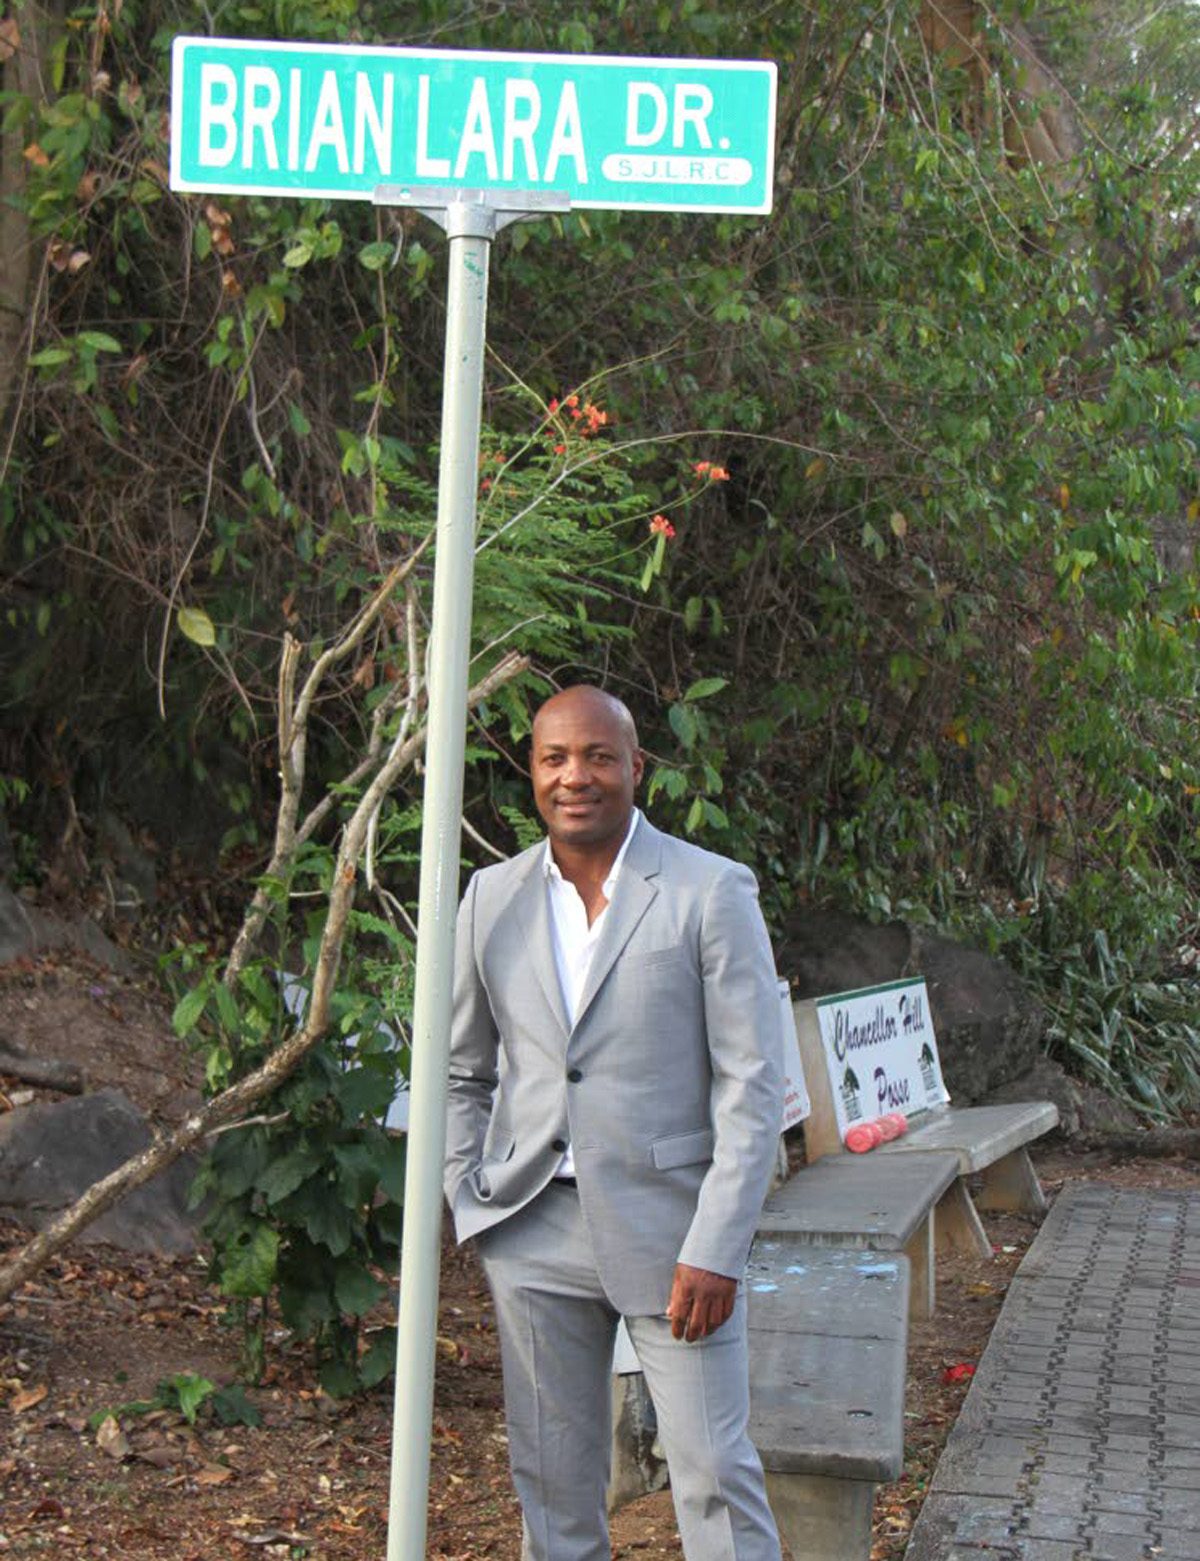 Cricket legend Brian Lara stands next to his own street sign at Chancellor Hill, Port of Spain on May 2. PHOTO BY ANGELO MARCELLE